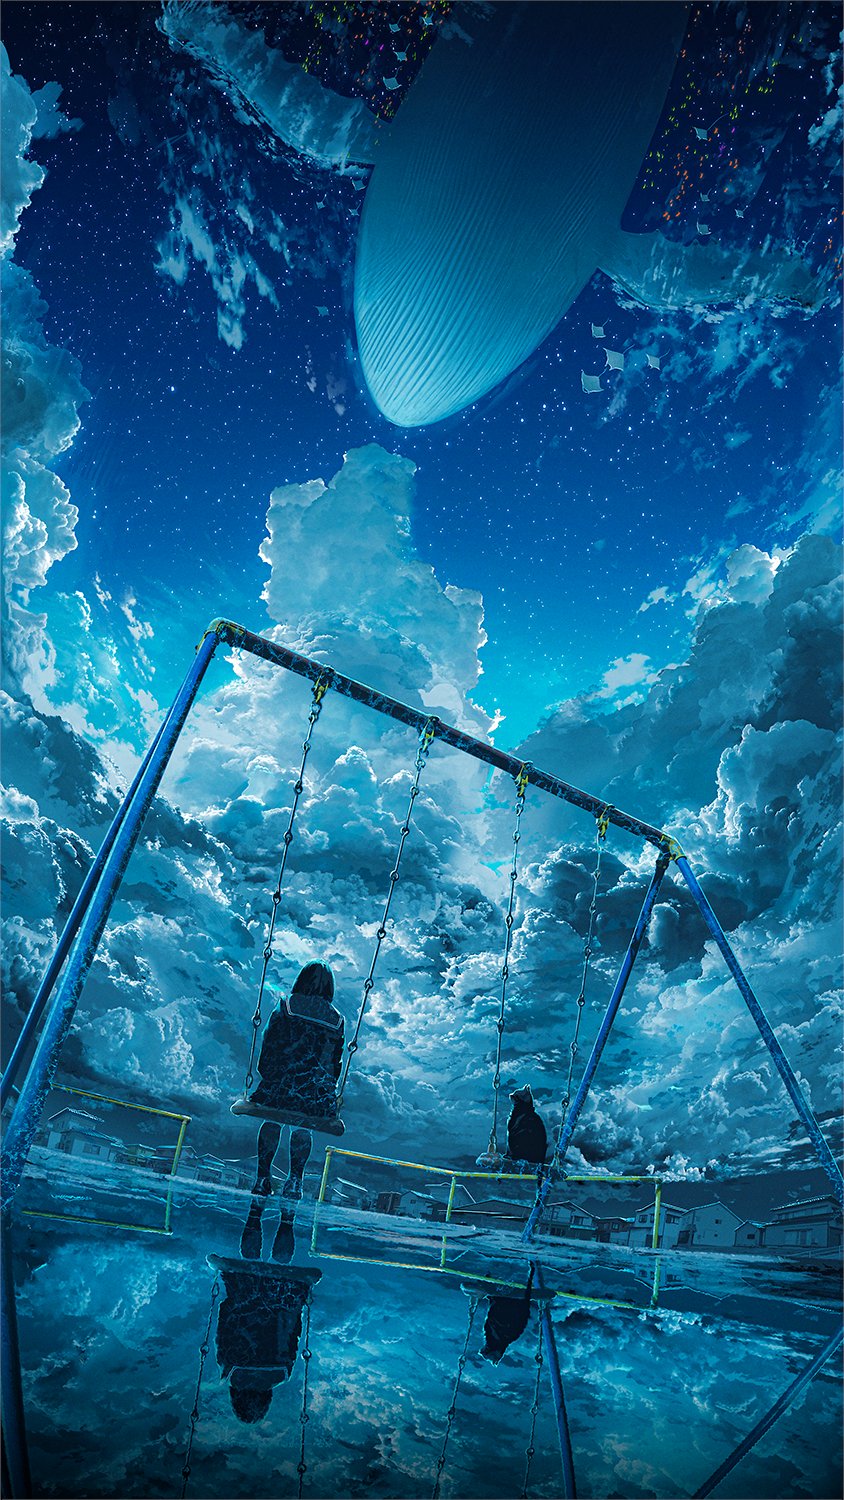 Anime 844x1500 Chocoshi anime girls low-angle reflection cats sky cumulus clouds water flying whales whale starred sky stars animals puddle school uniform house rear view night swings portrait display manta rays socks black socks  schoolgirl knee high socks shoes